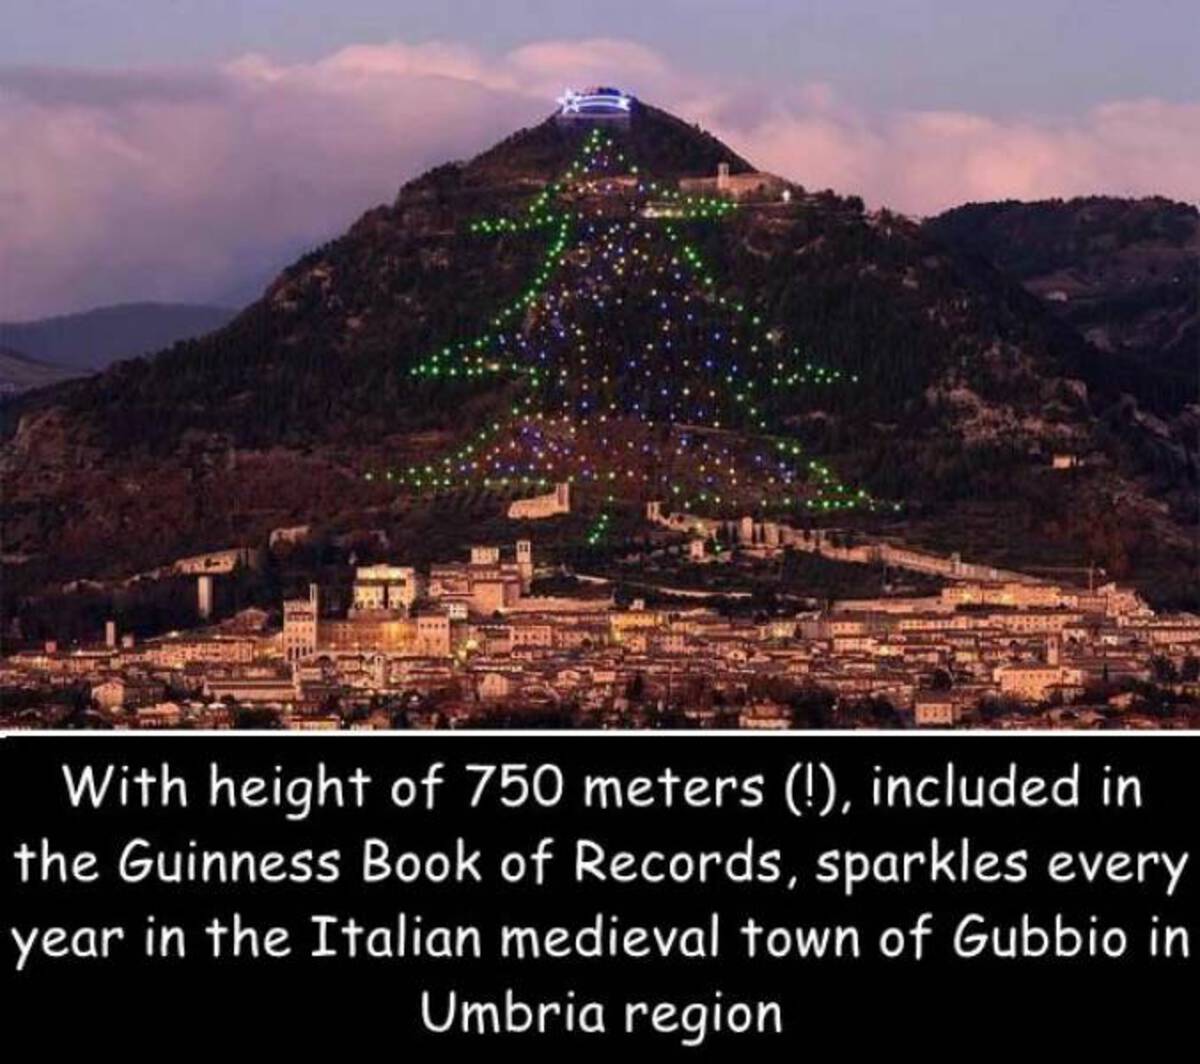 152335 With height of 750 meters !, included in the Guinness Book of Records, sparkles every year in the Italian medieval town of Gubbio in Umbria region